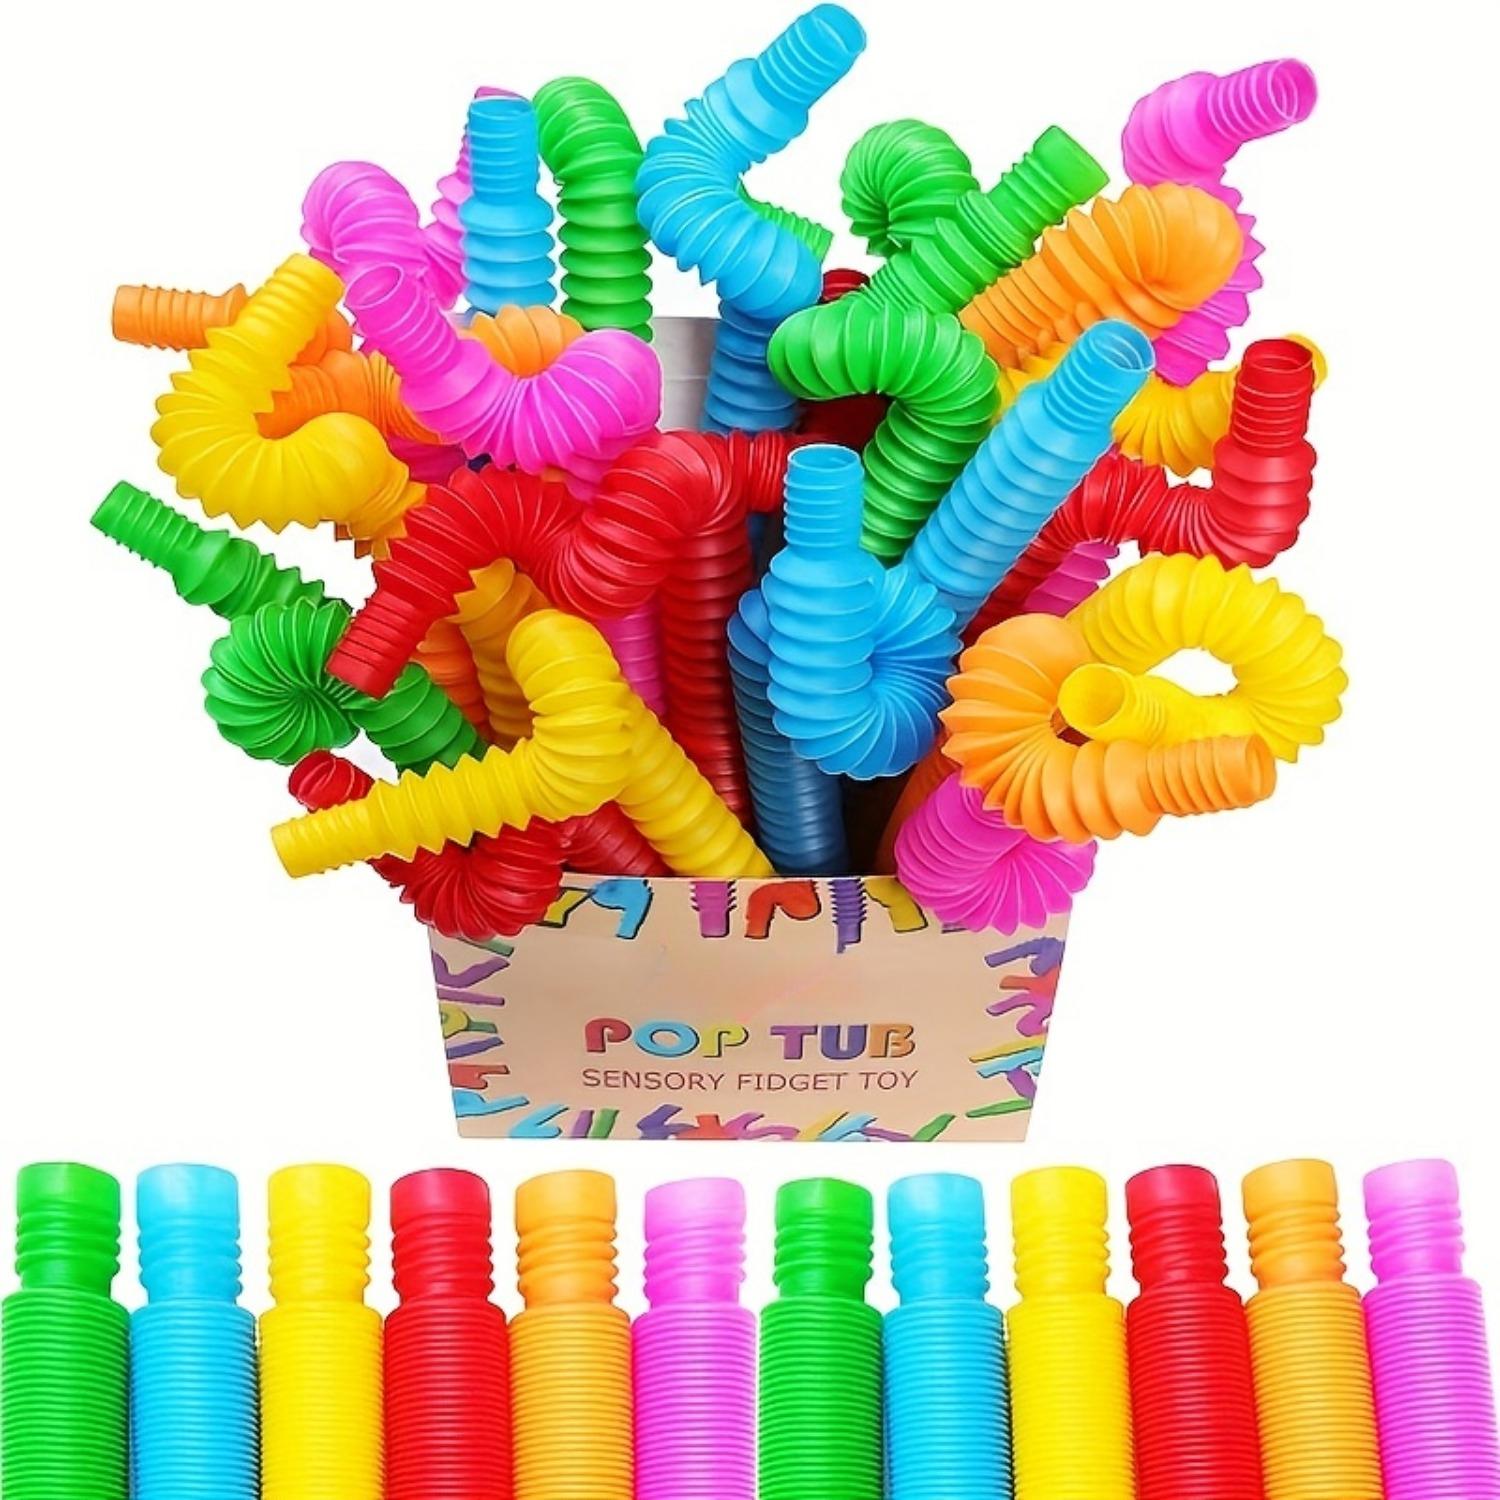 

8/12pcs Pop Tubes Sensory Toys Perfect For Developing Fine Motor Skills, And Preschool Boys & Girls, Christmas And Halloween Gift